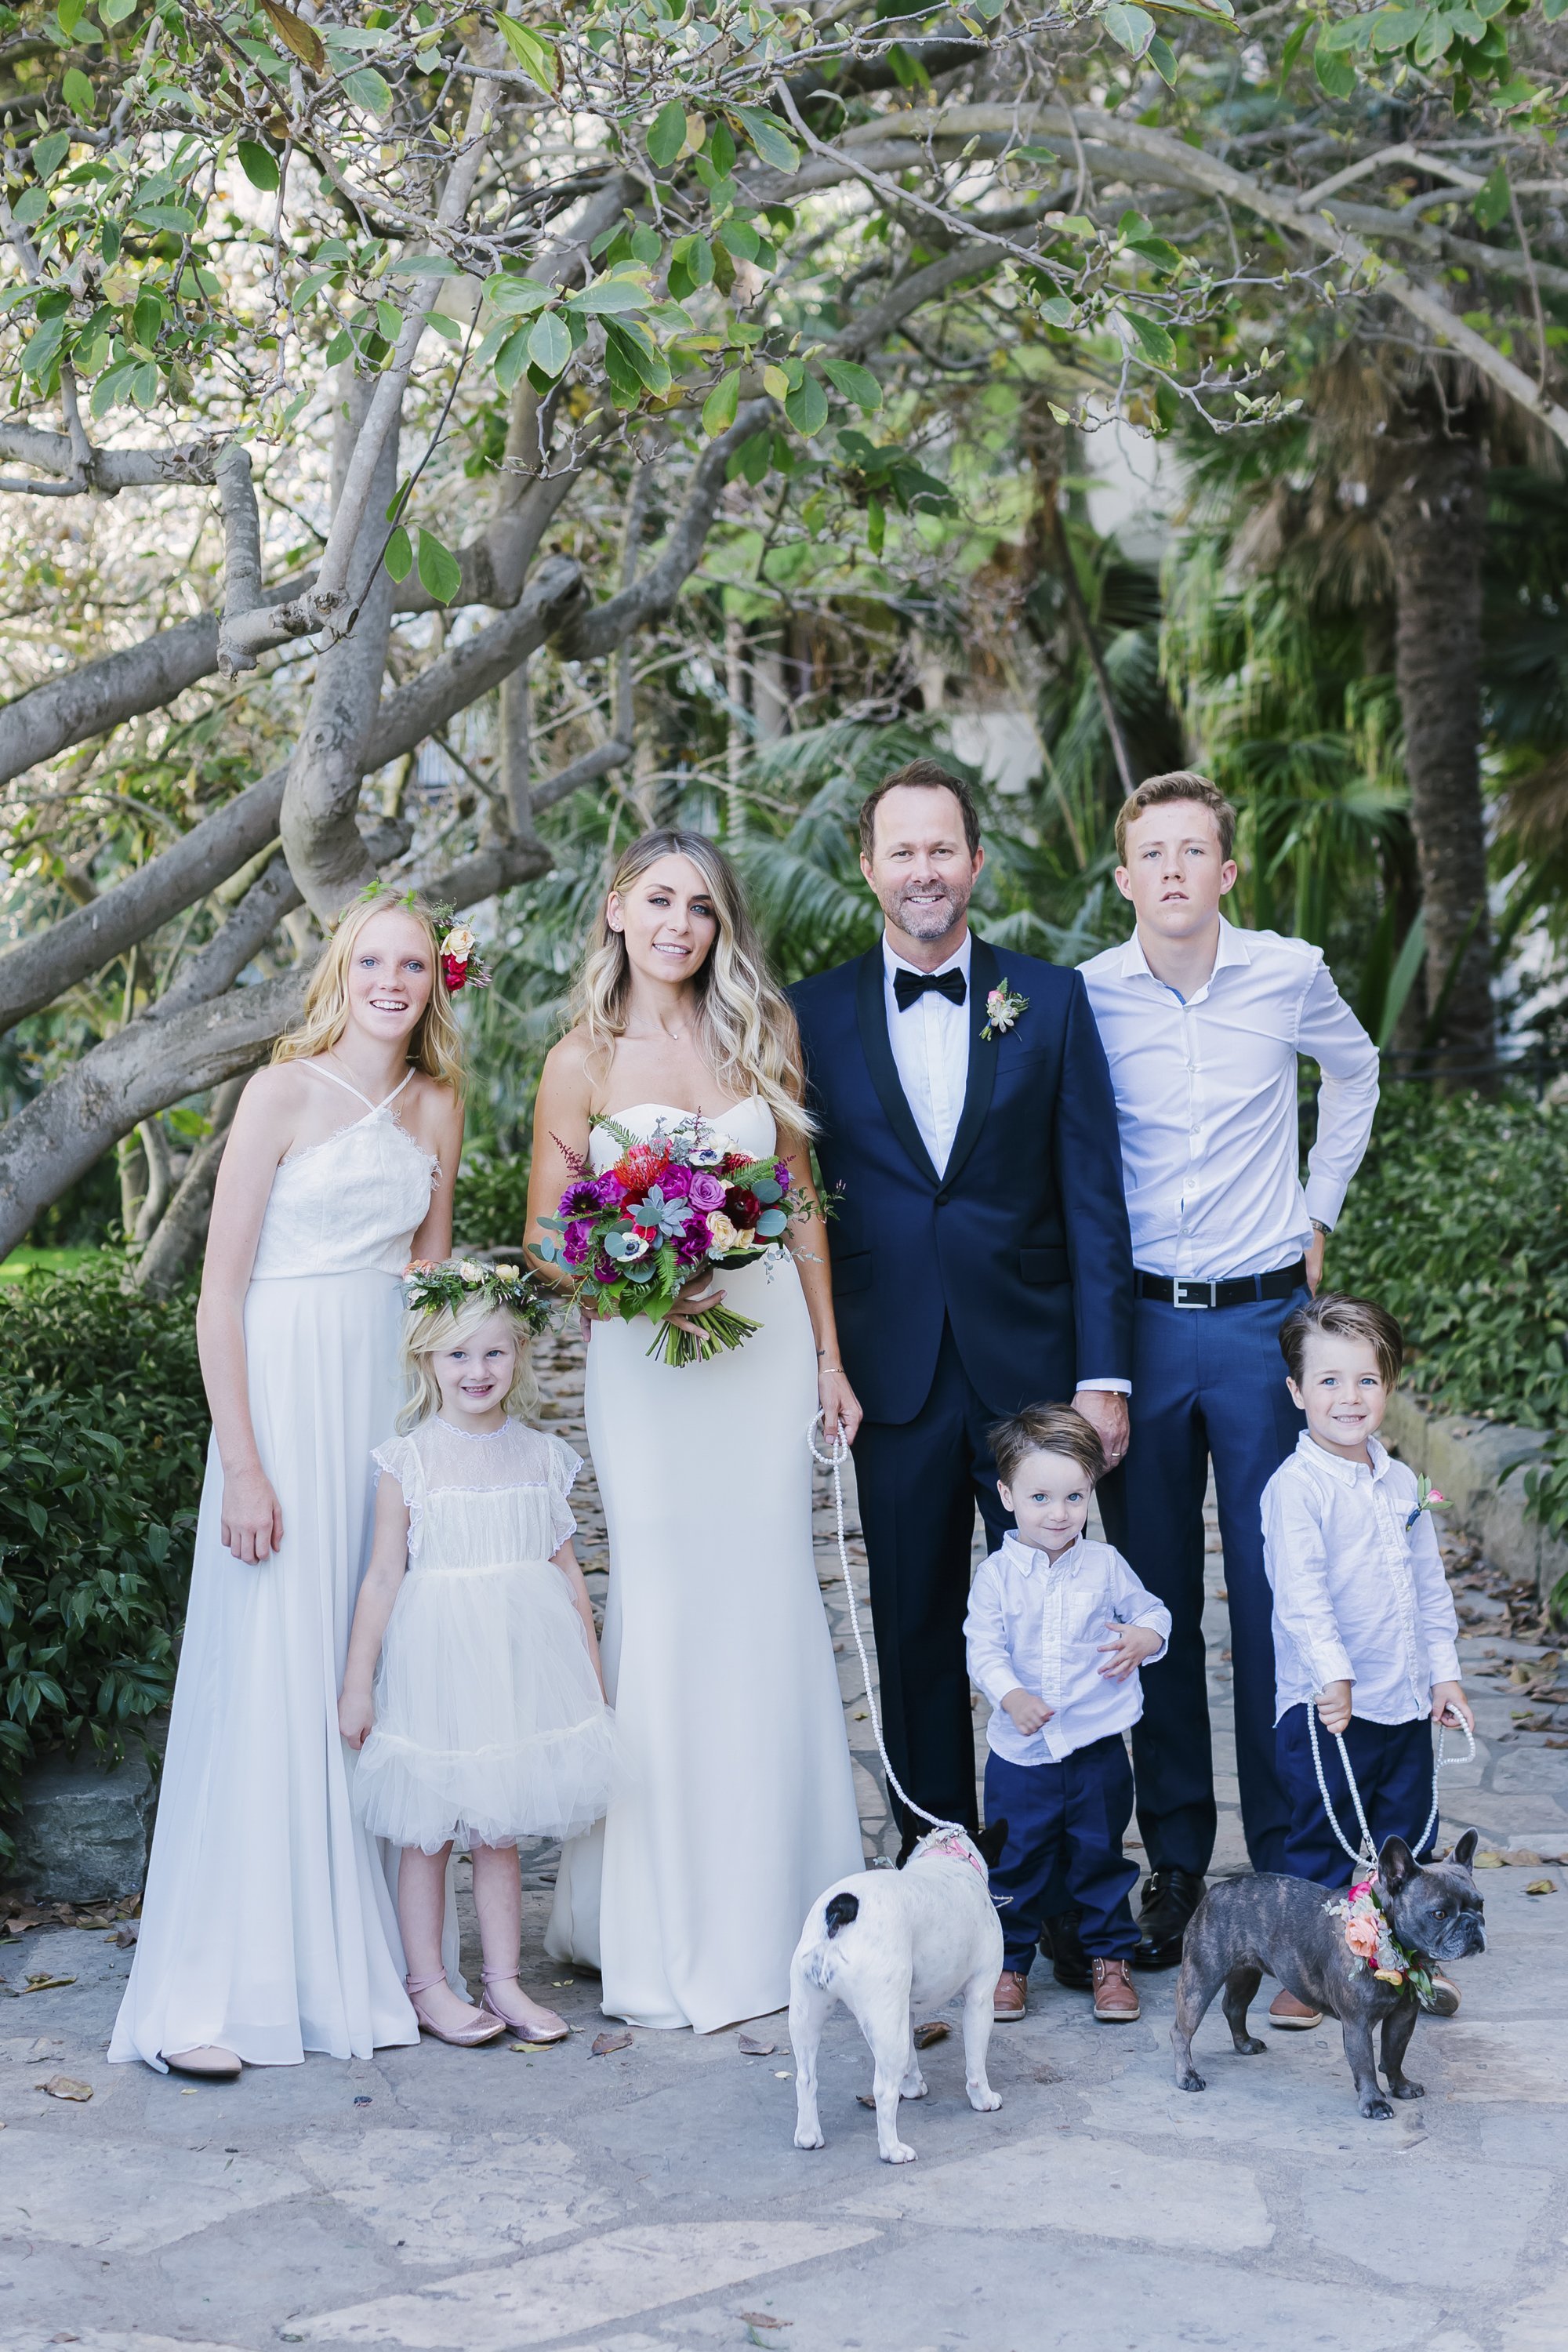 www.santabarbarawedding.com | Aurelia D’Amore Photography | Santa Barbara Courthouse | Soleil Events | Bride and Groom’s Family with Their Two Fur Babies